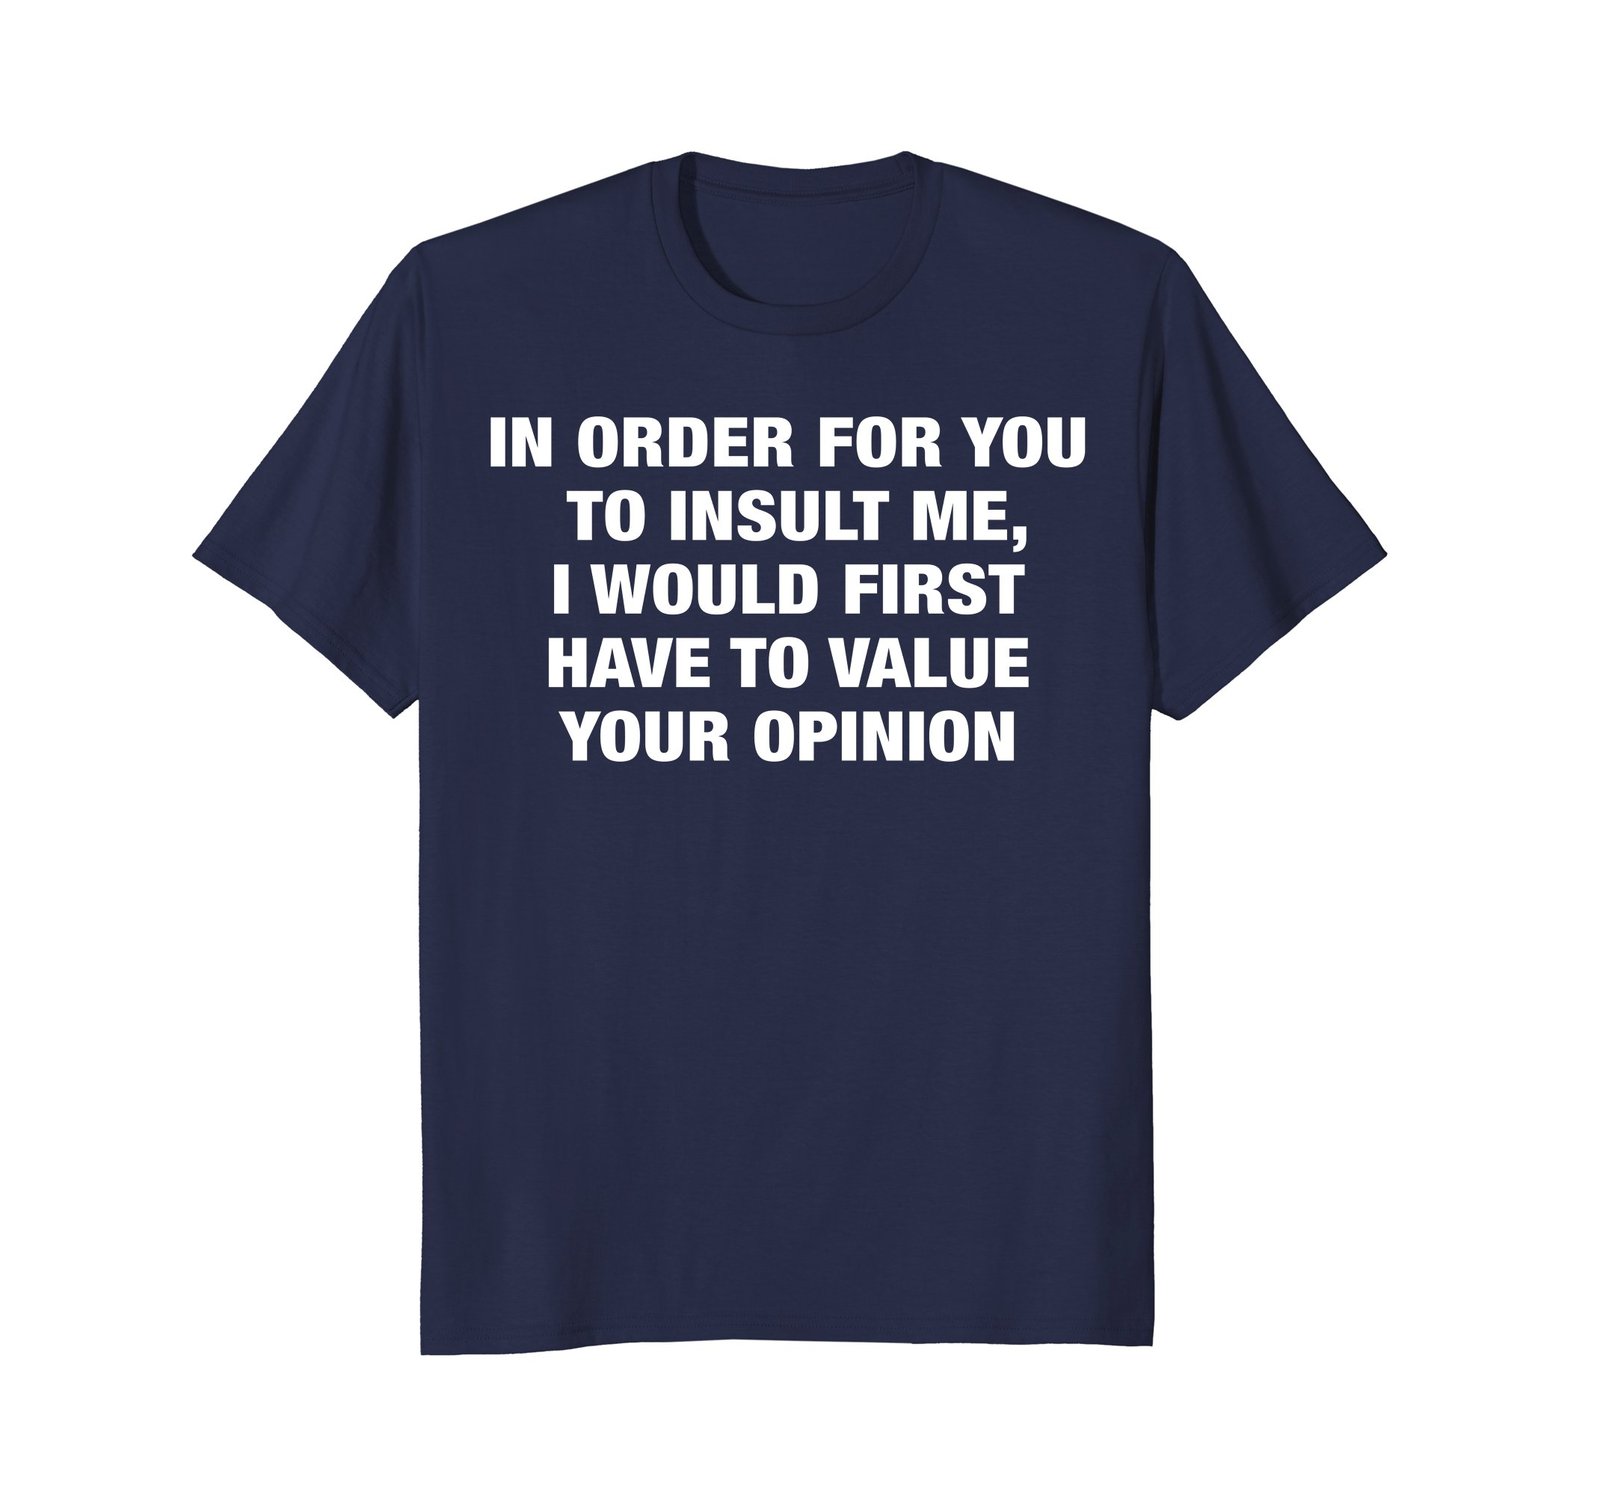 Funny Shirts - Sarcastic Humor T-Shirt - In Order to Insult Me - Funny ...